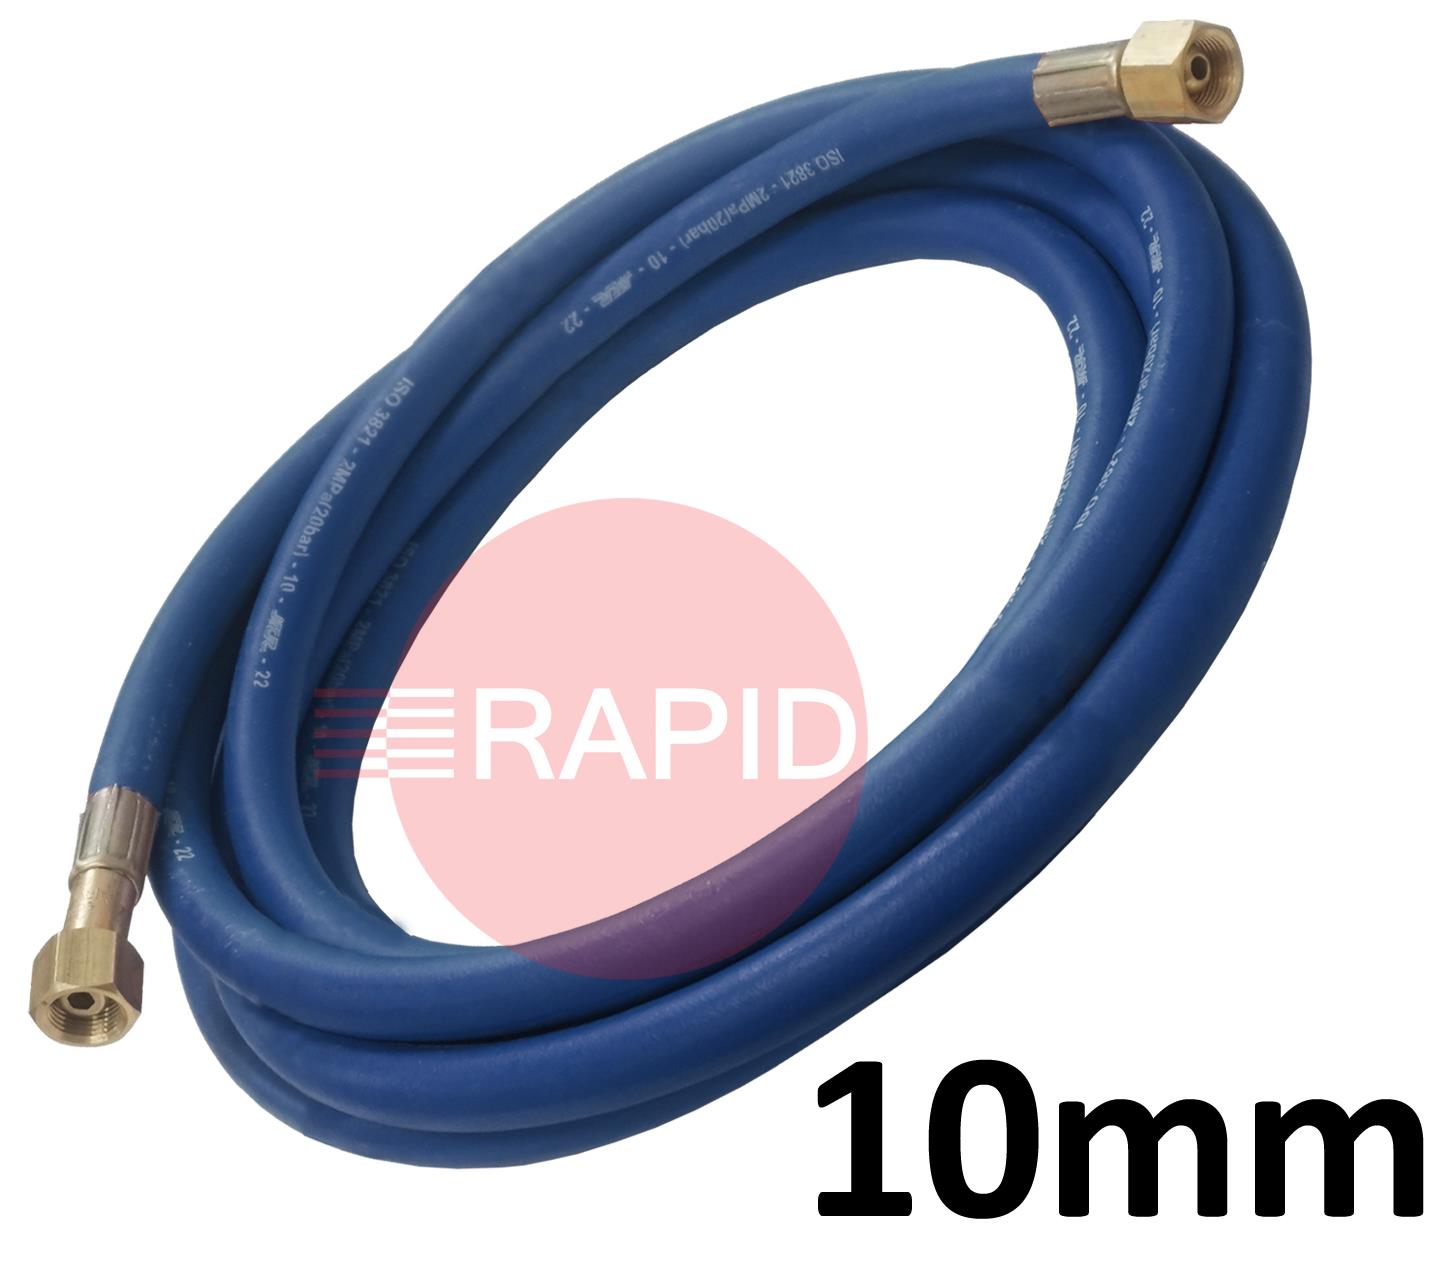 A5117  Fitted Oxygen Hose. 10mm Bore. G3/8 Check Valve & G3/8 Regulator Connection - 5m